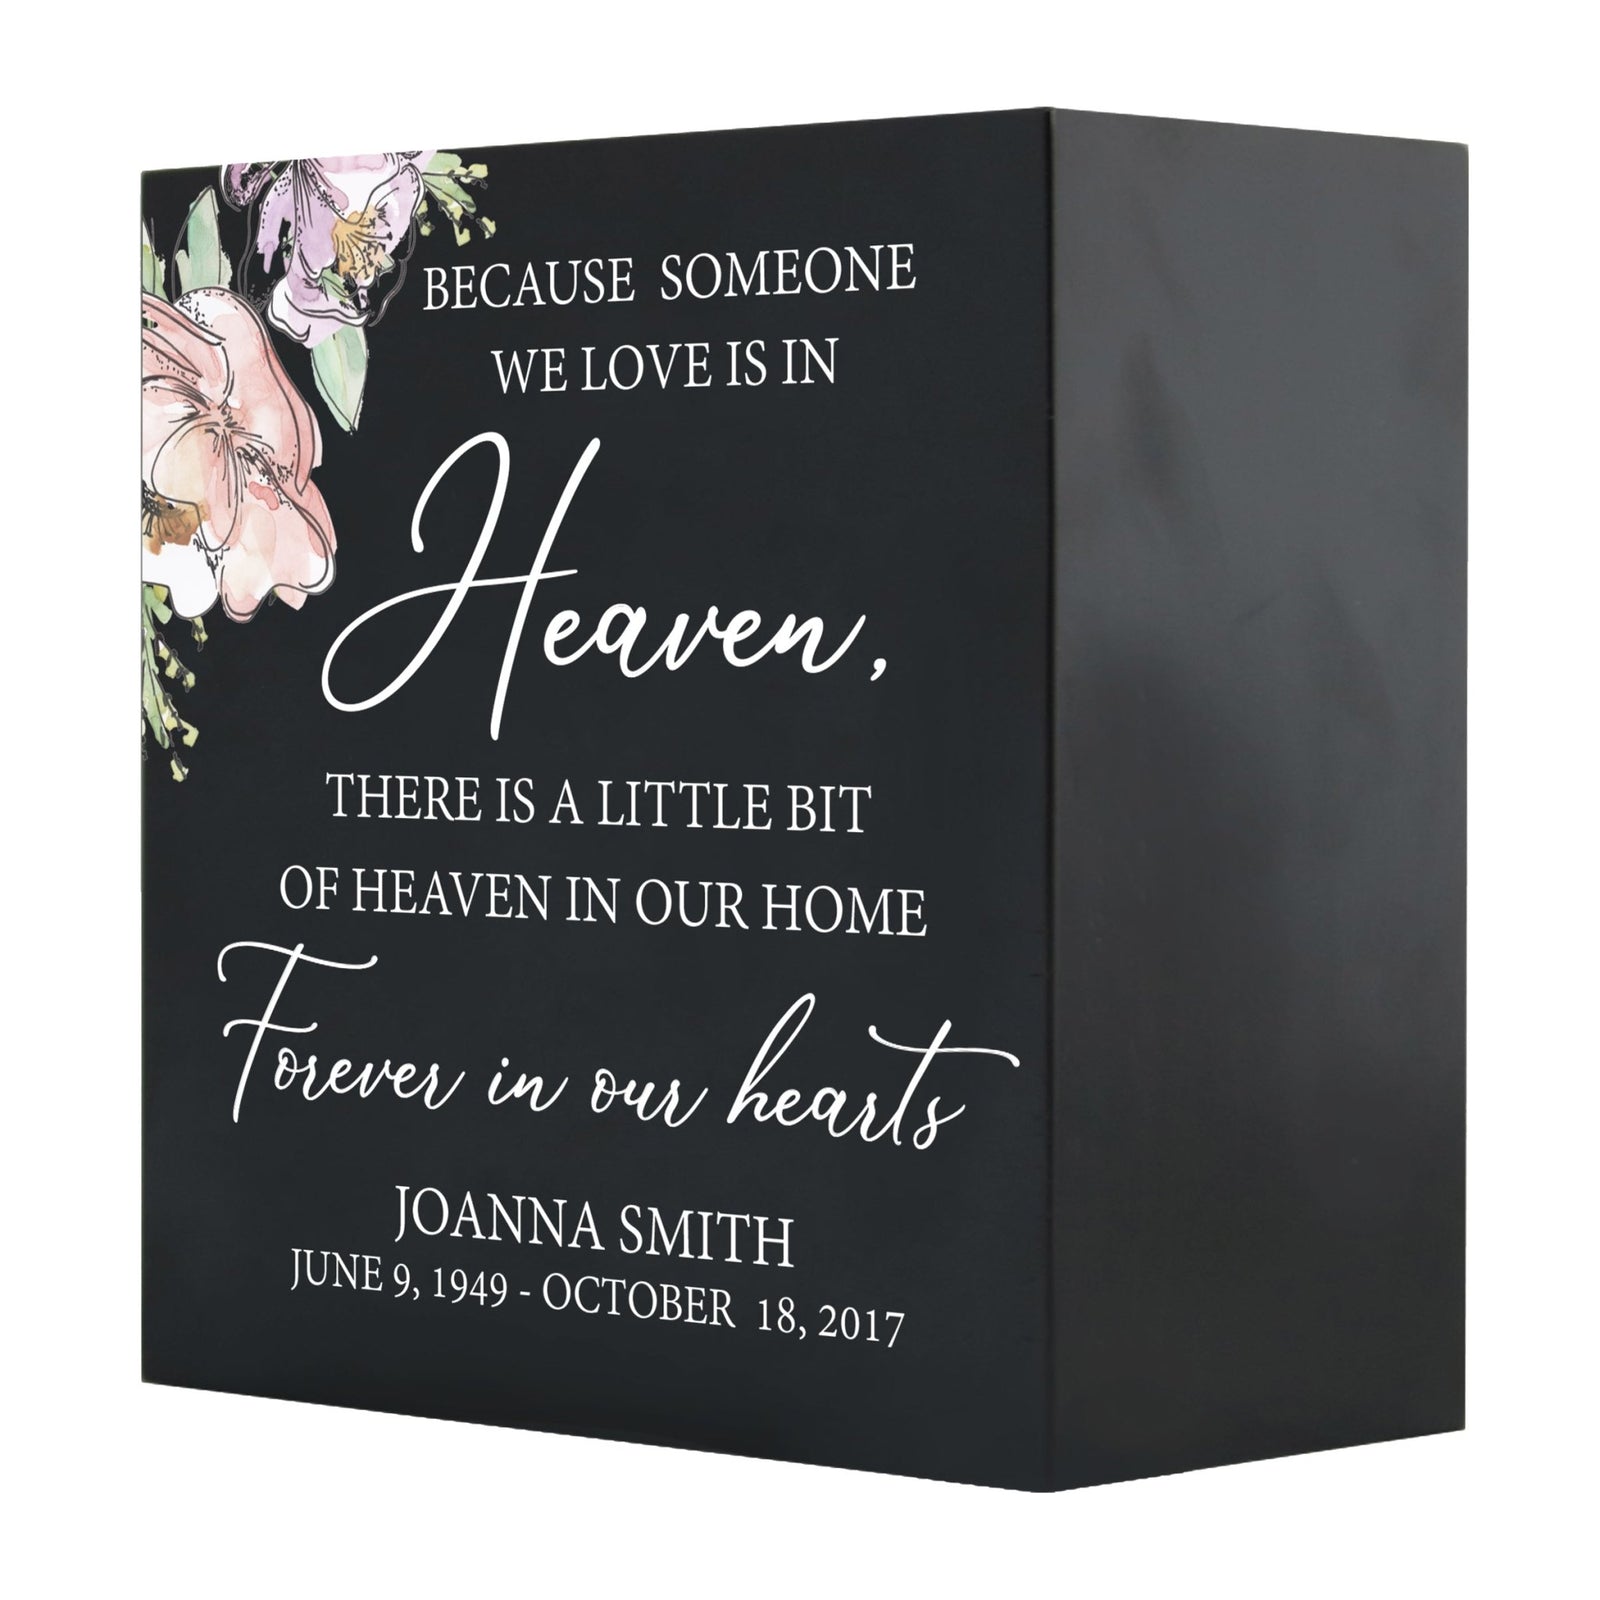 Personalized Modern Inspirational Memorial Wooden Shadow Box and Urn 6x6 holds 53 cu in of Human Ashes - Because Someone We Love (Black) - LifeSong Milestones